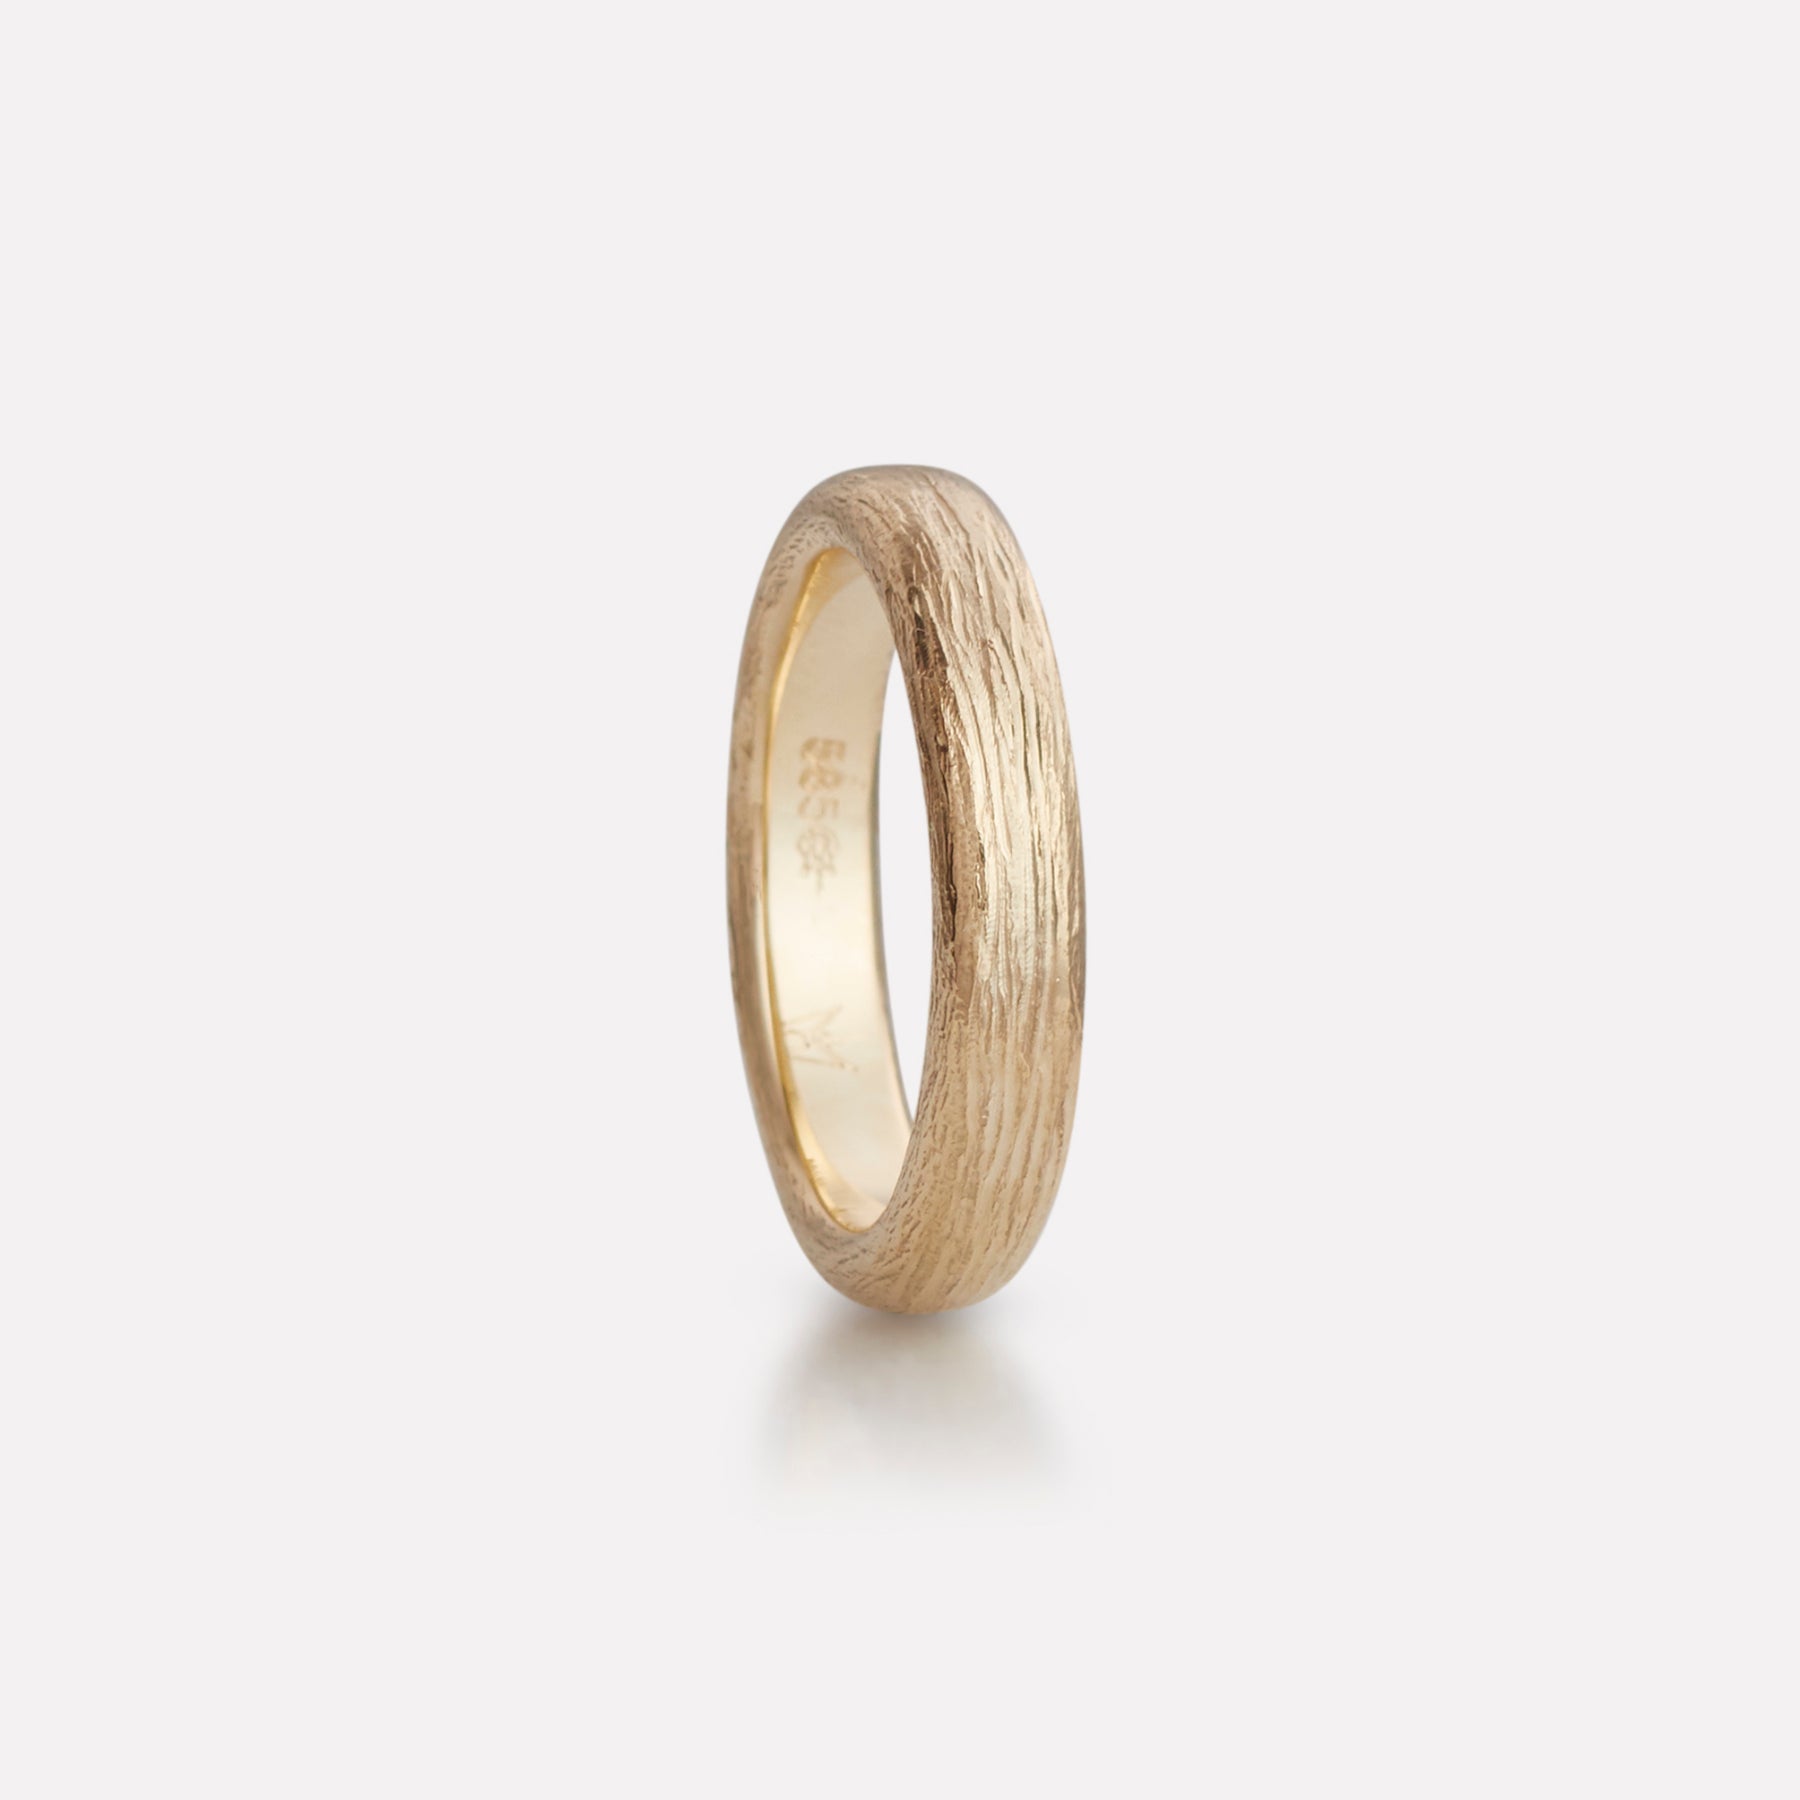 Fossefall ring in yellow gold, ladies